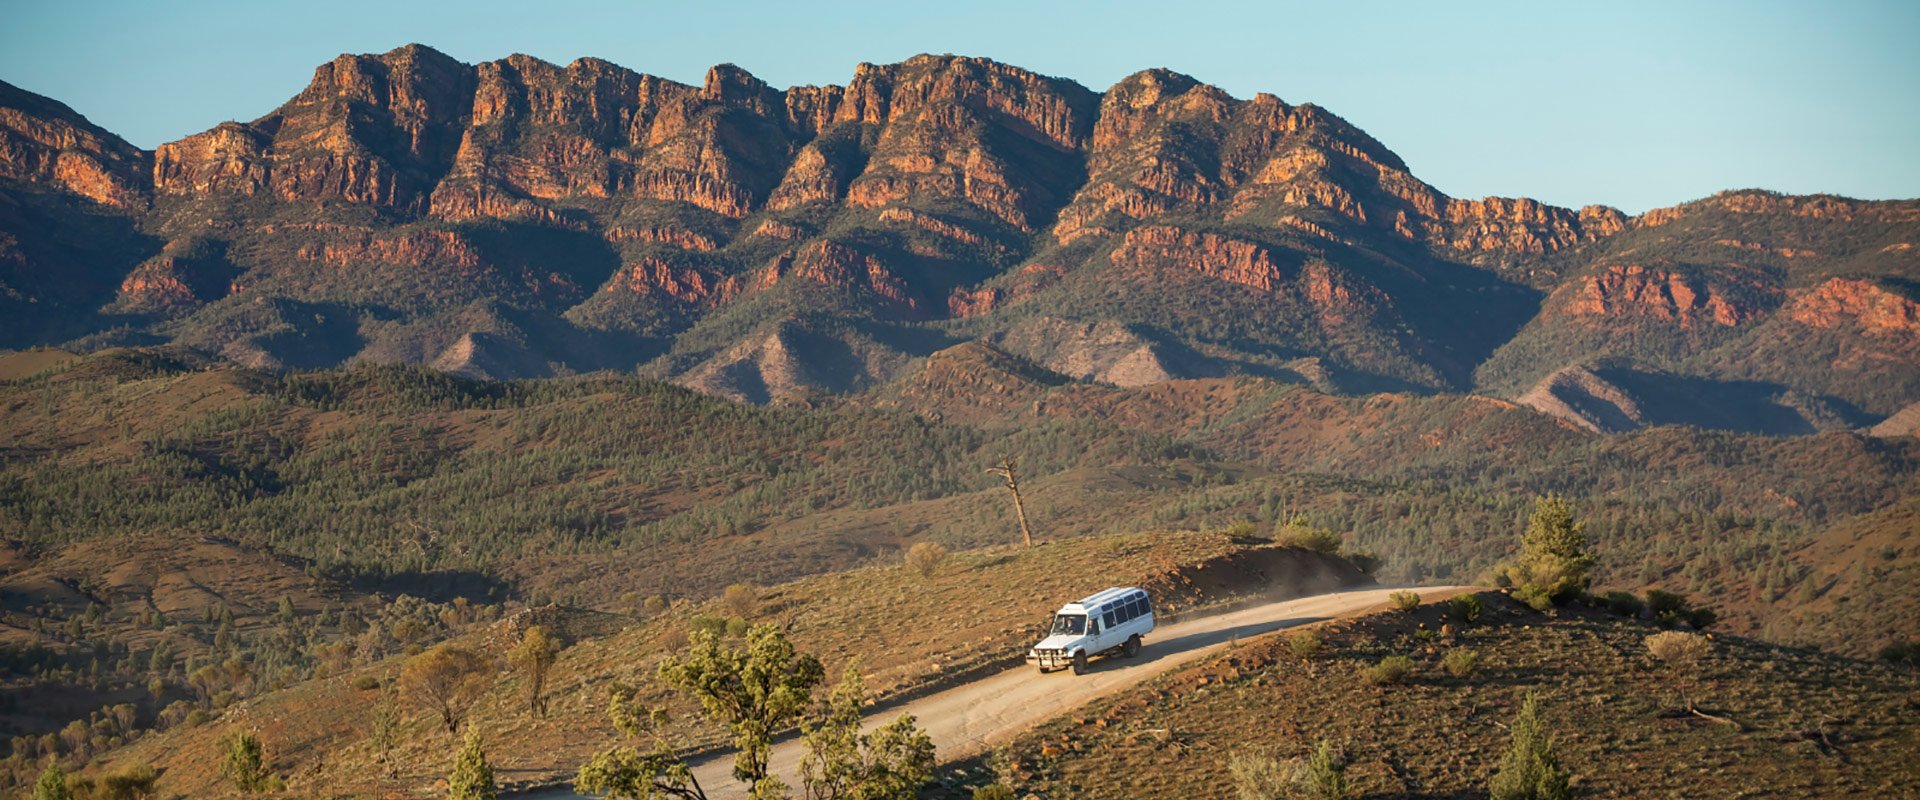 Visit Wilpena Pound | Accommodation & Things To Do | SA Tourism |...